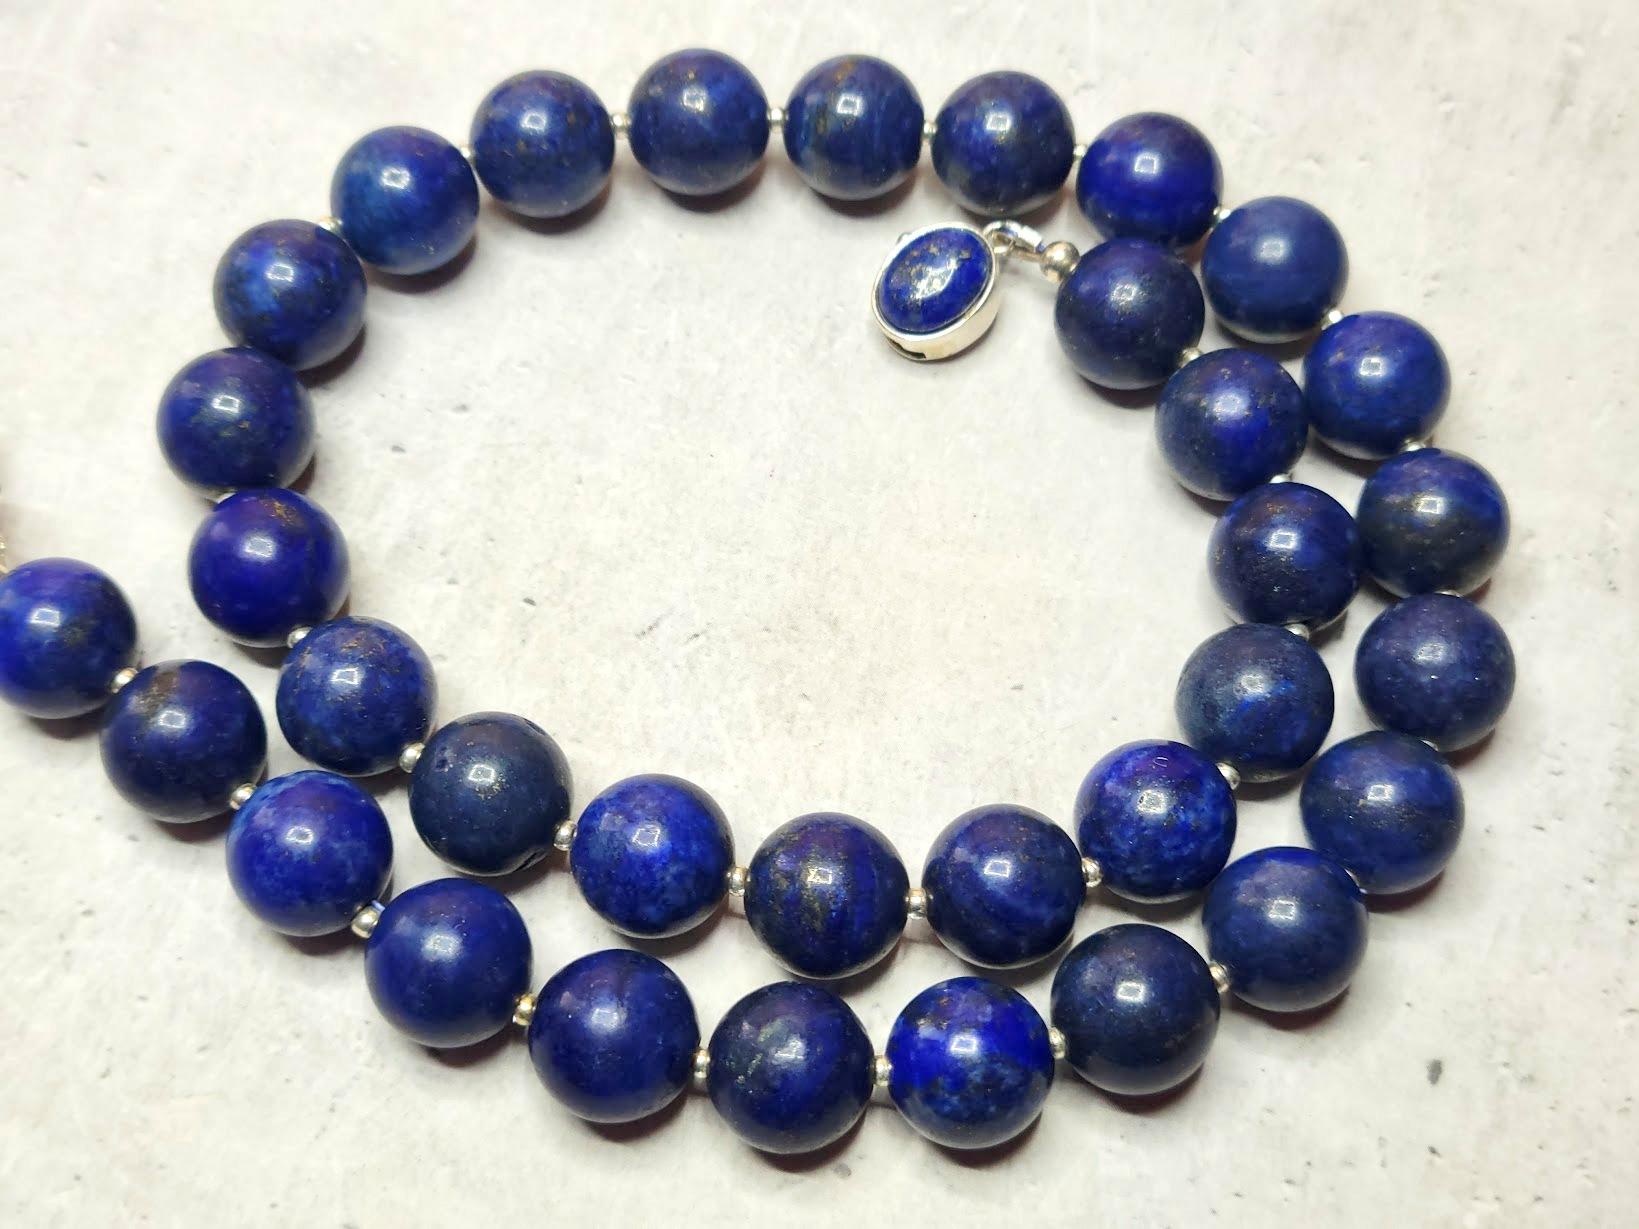 The necklace is 17.5 inches (44.5 cm) long, and the smooth round beads are 12 mm in size.
The lapis lazuli beads are dark blue. Lapis lazuli has visible calcite and golden pyrite flecks.
Natural color, not dyed. No thermal or other mechanical